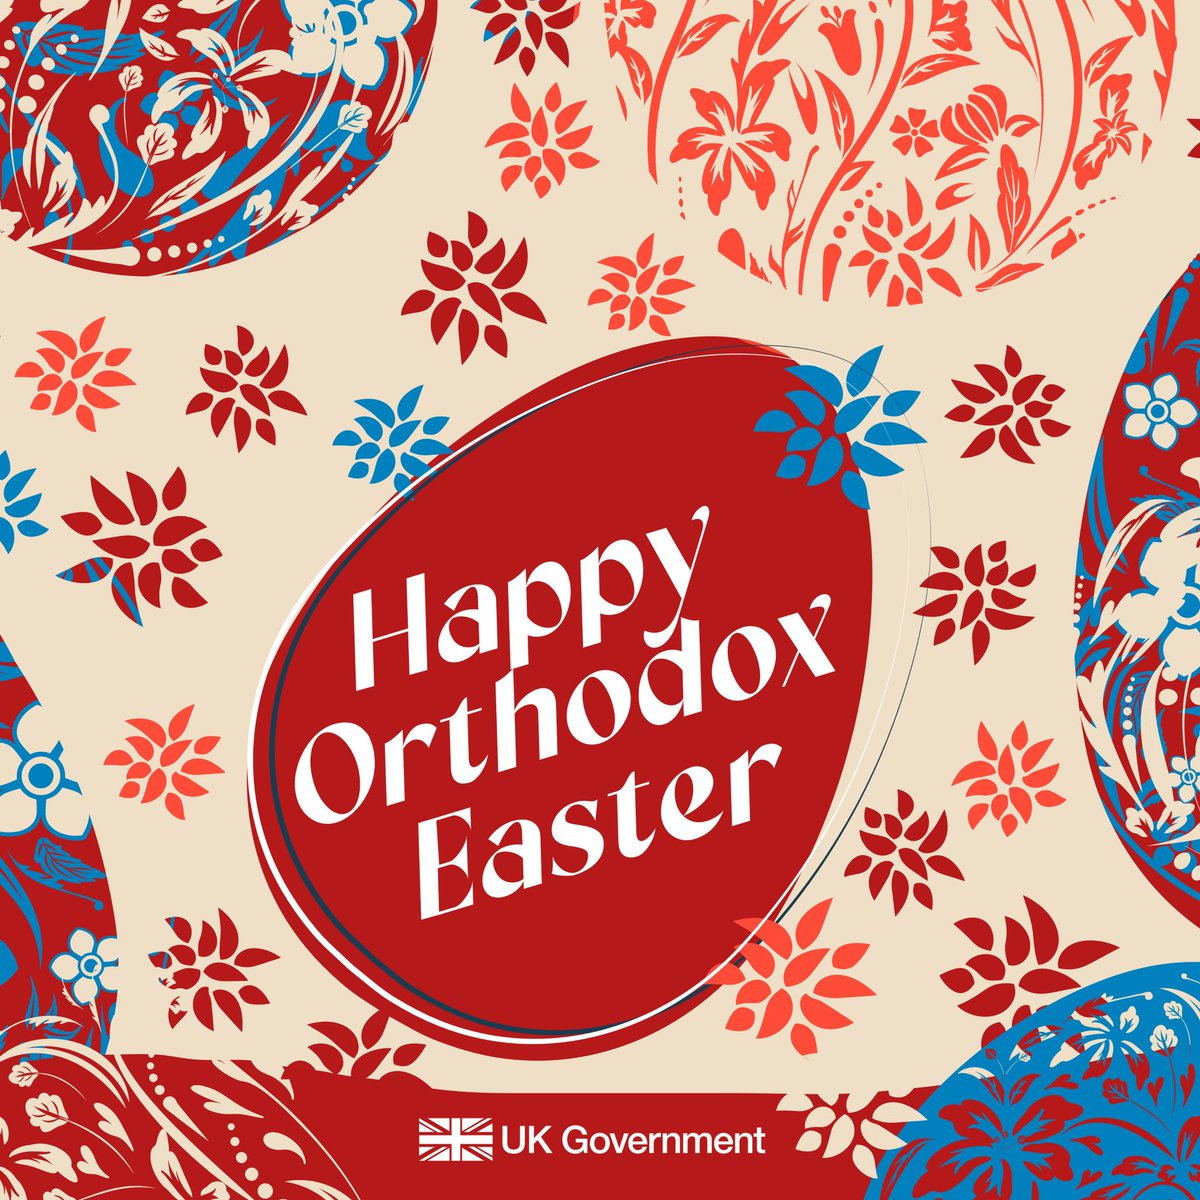 Wishing Orthodox and Coptic Christians a very Happy Easter